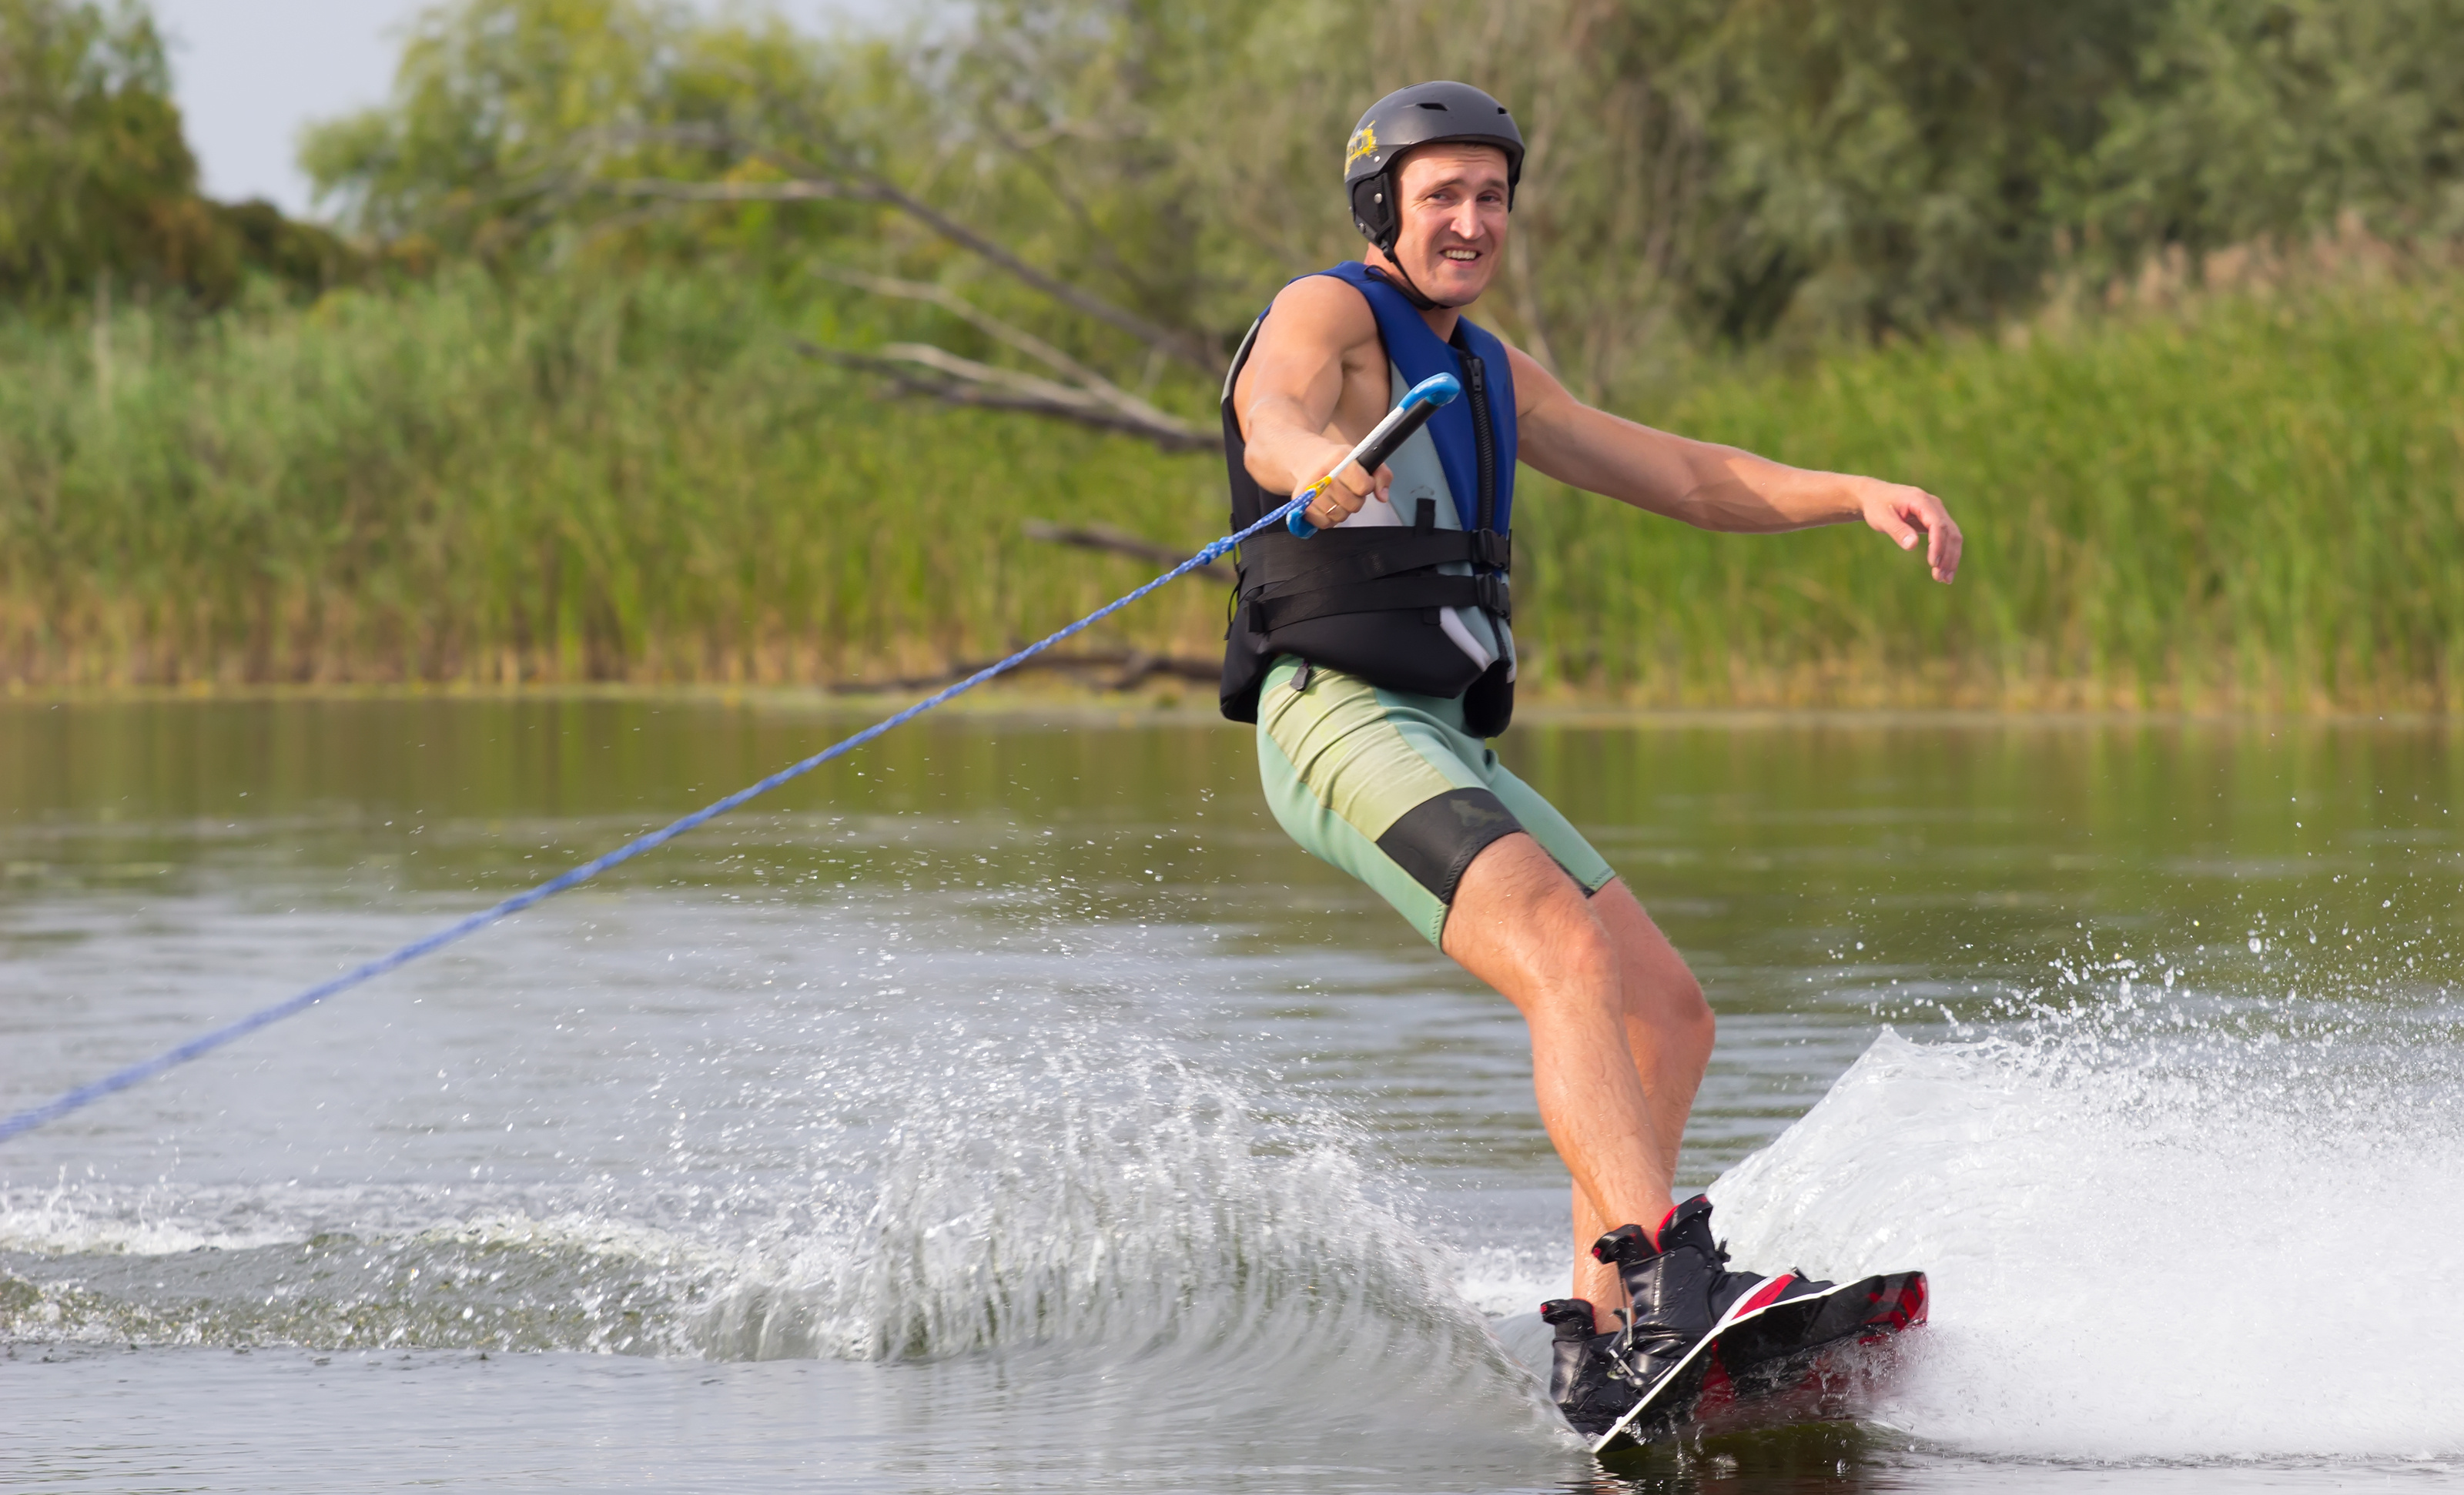 Wakeboarding: Freestyle wakeboarding in the river, Pleasure and competition water sports. 3200x1950 HD Background.